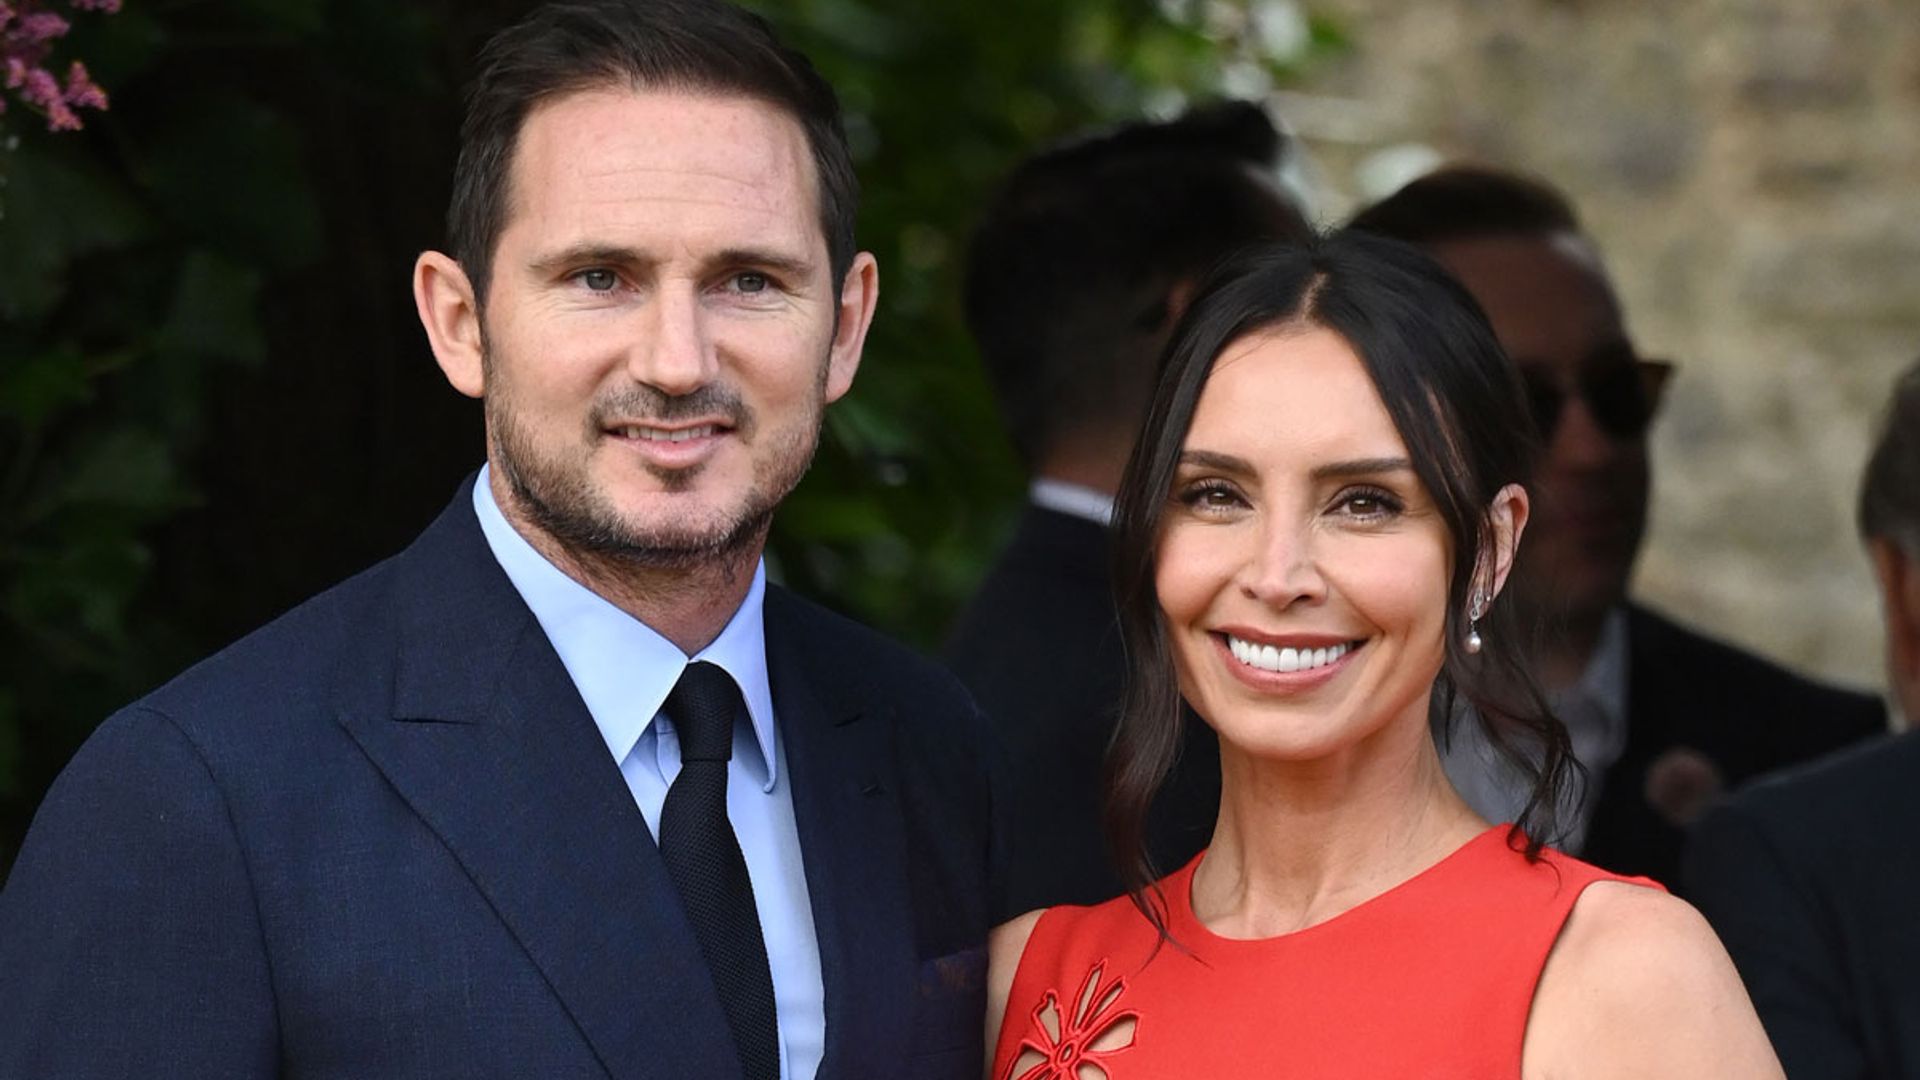 Christine and Frank Lampard's lifelike anniversary cake will blow your mind